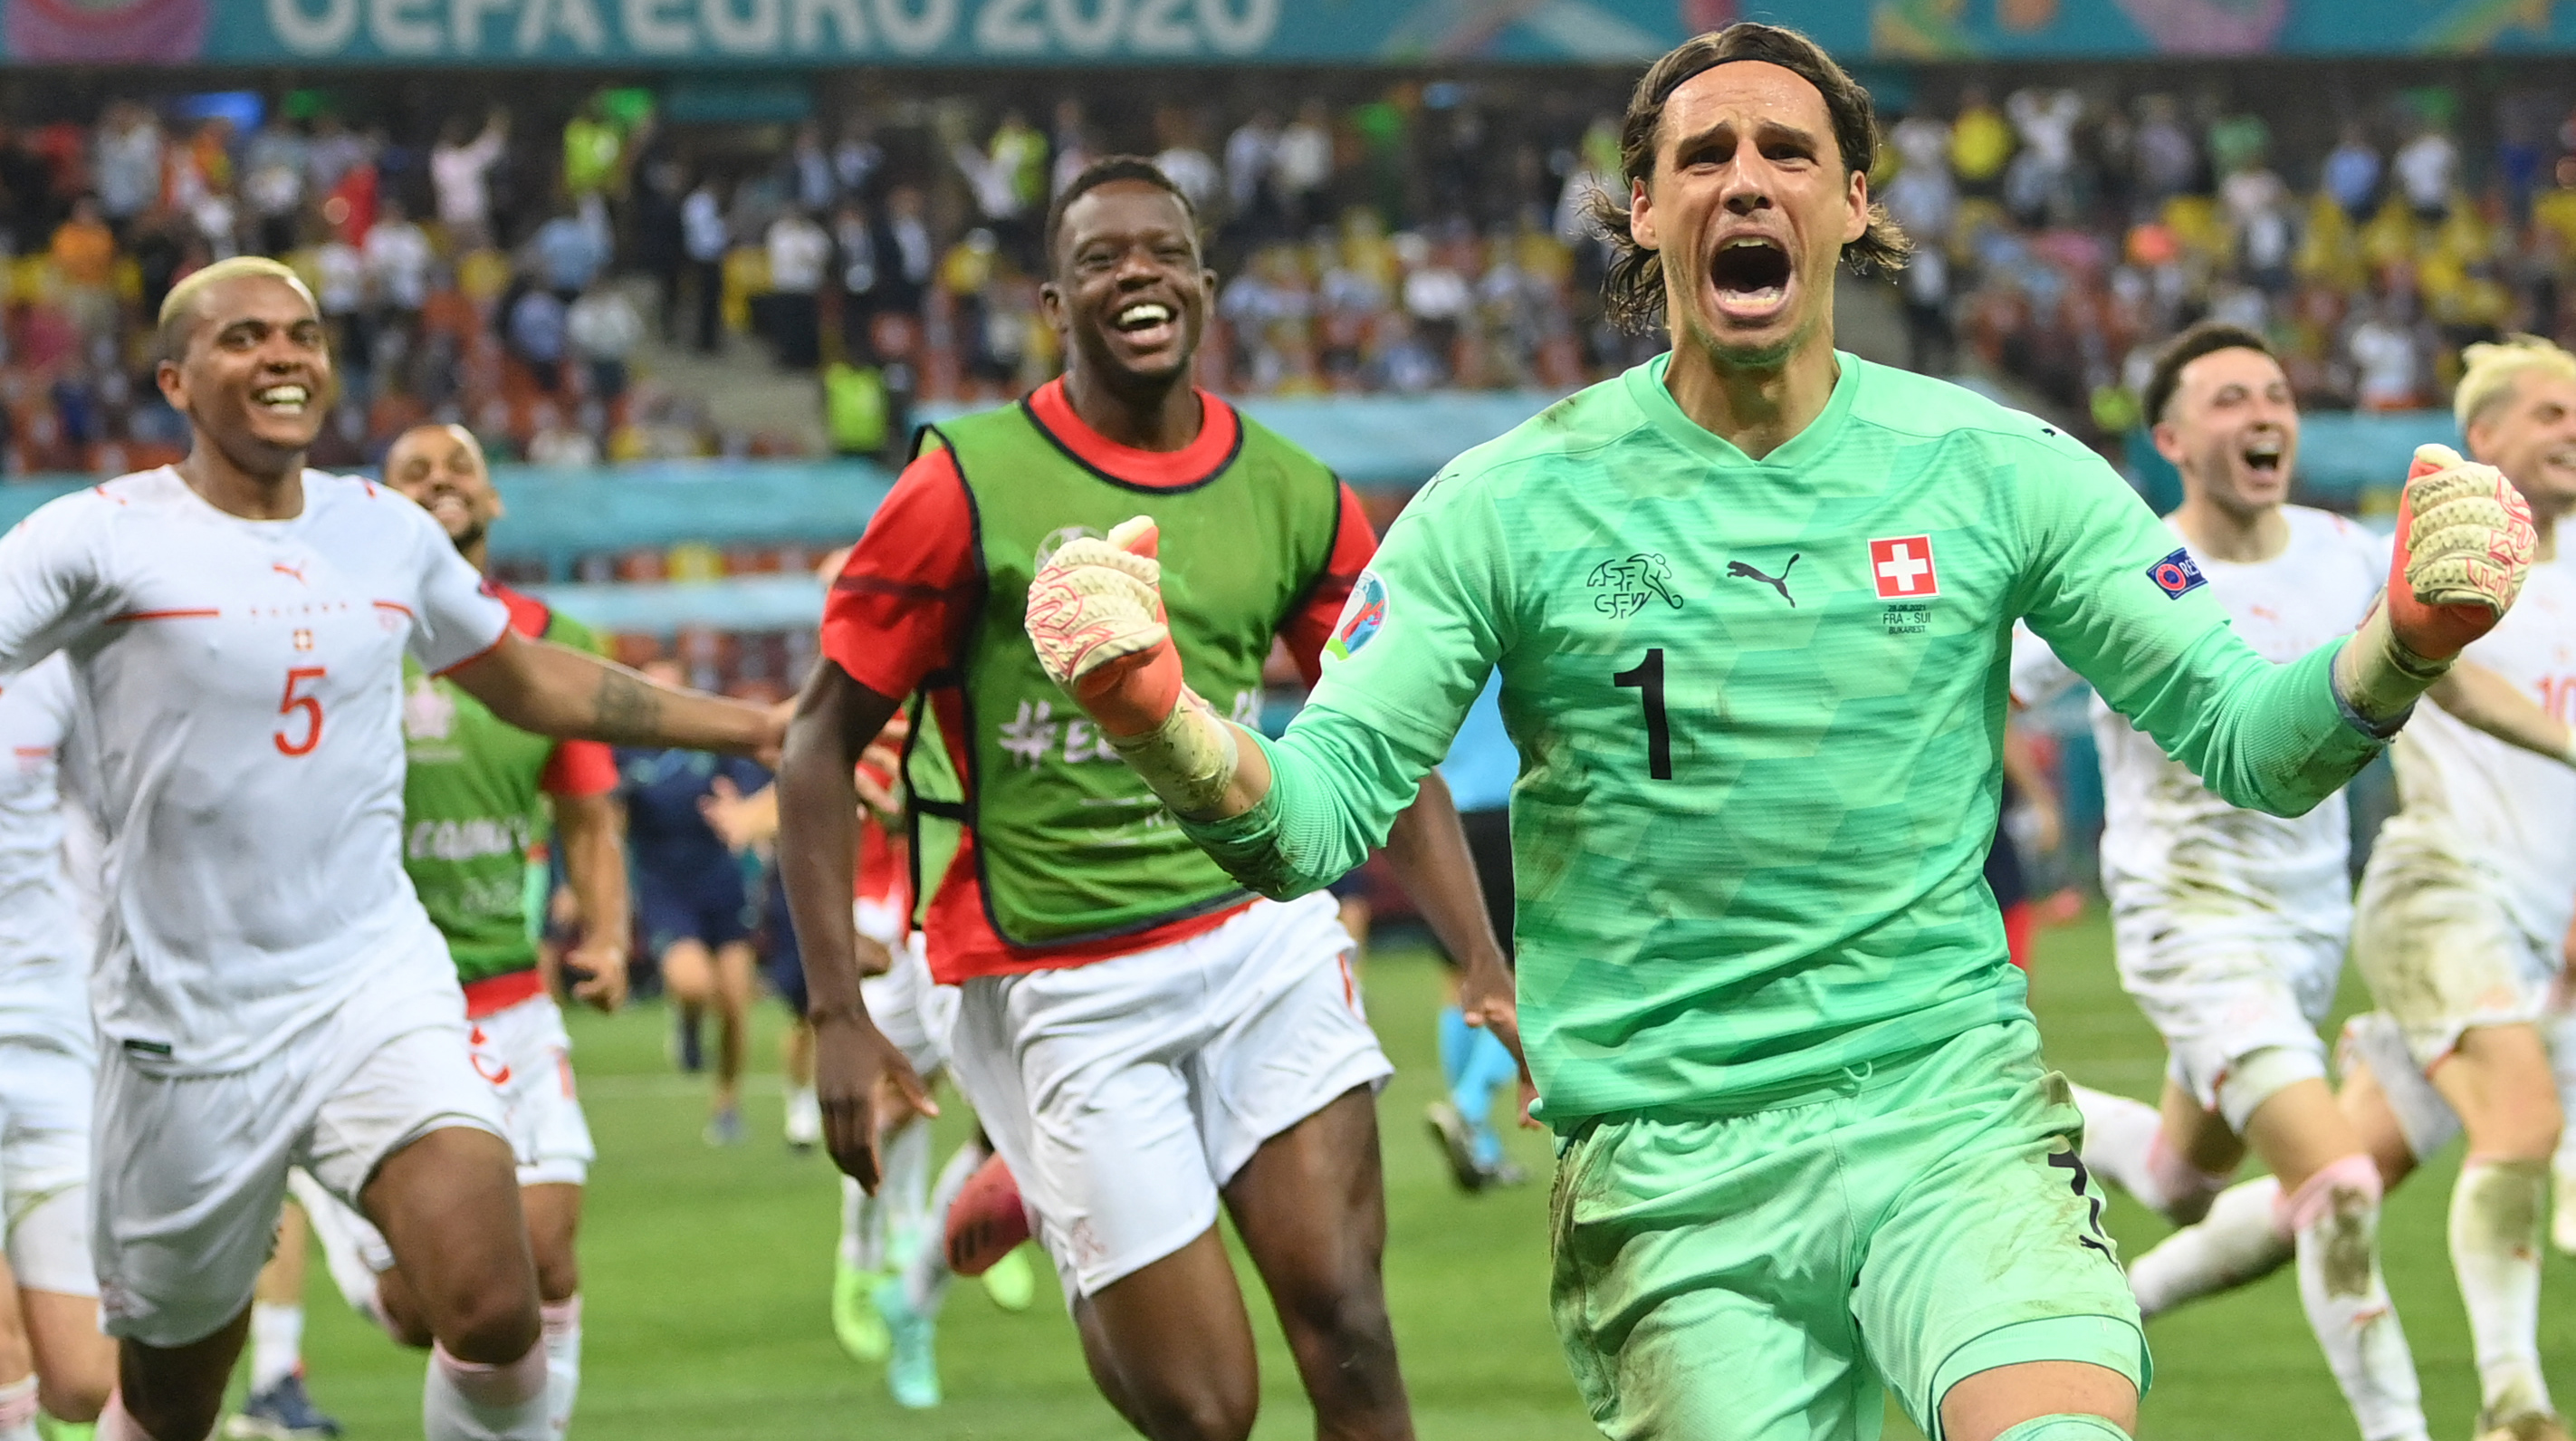 Switzerland's goalkeeper Yann Sommer reacts after saving a shot by France's forward Kylian Mbappe in the penalty shootout during the UEFA EURO 2020 round of 16 football match between France and Switzerland at the National Arena in Bucharest on June 28, 2021